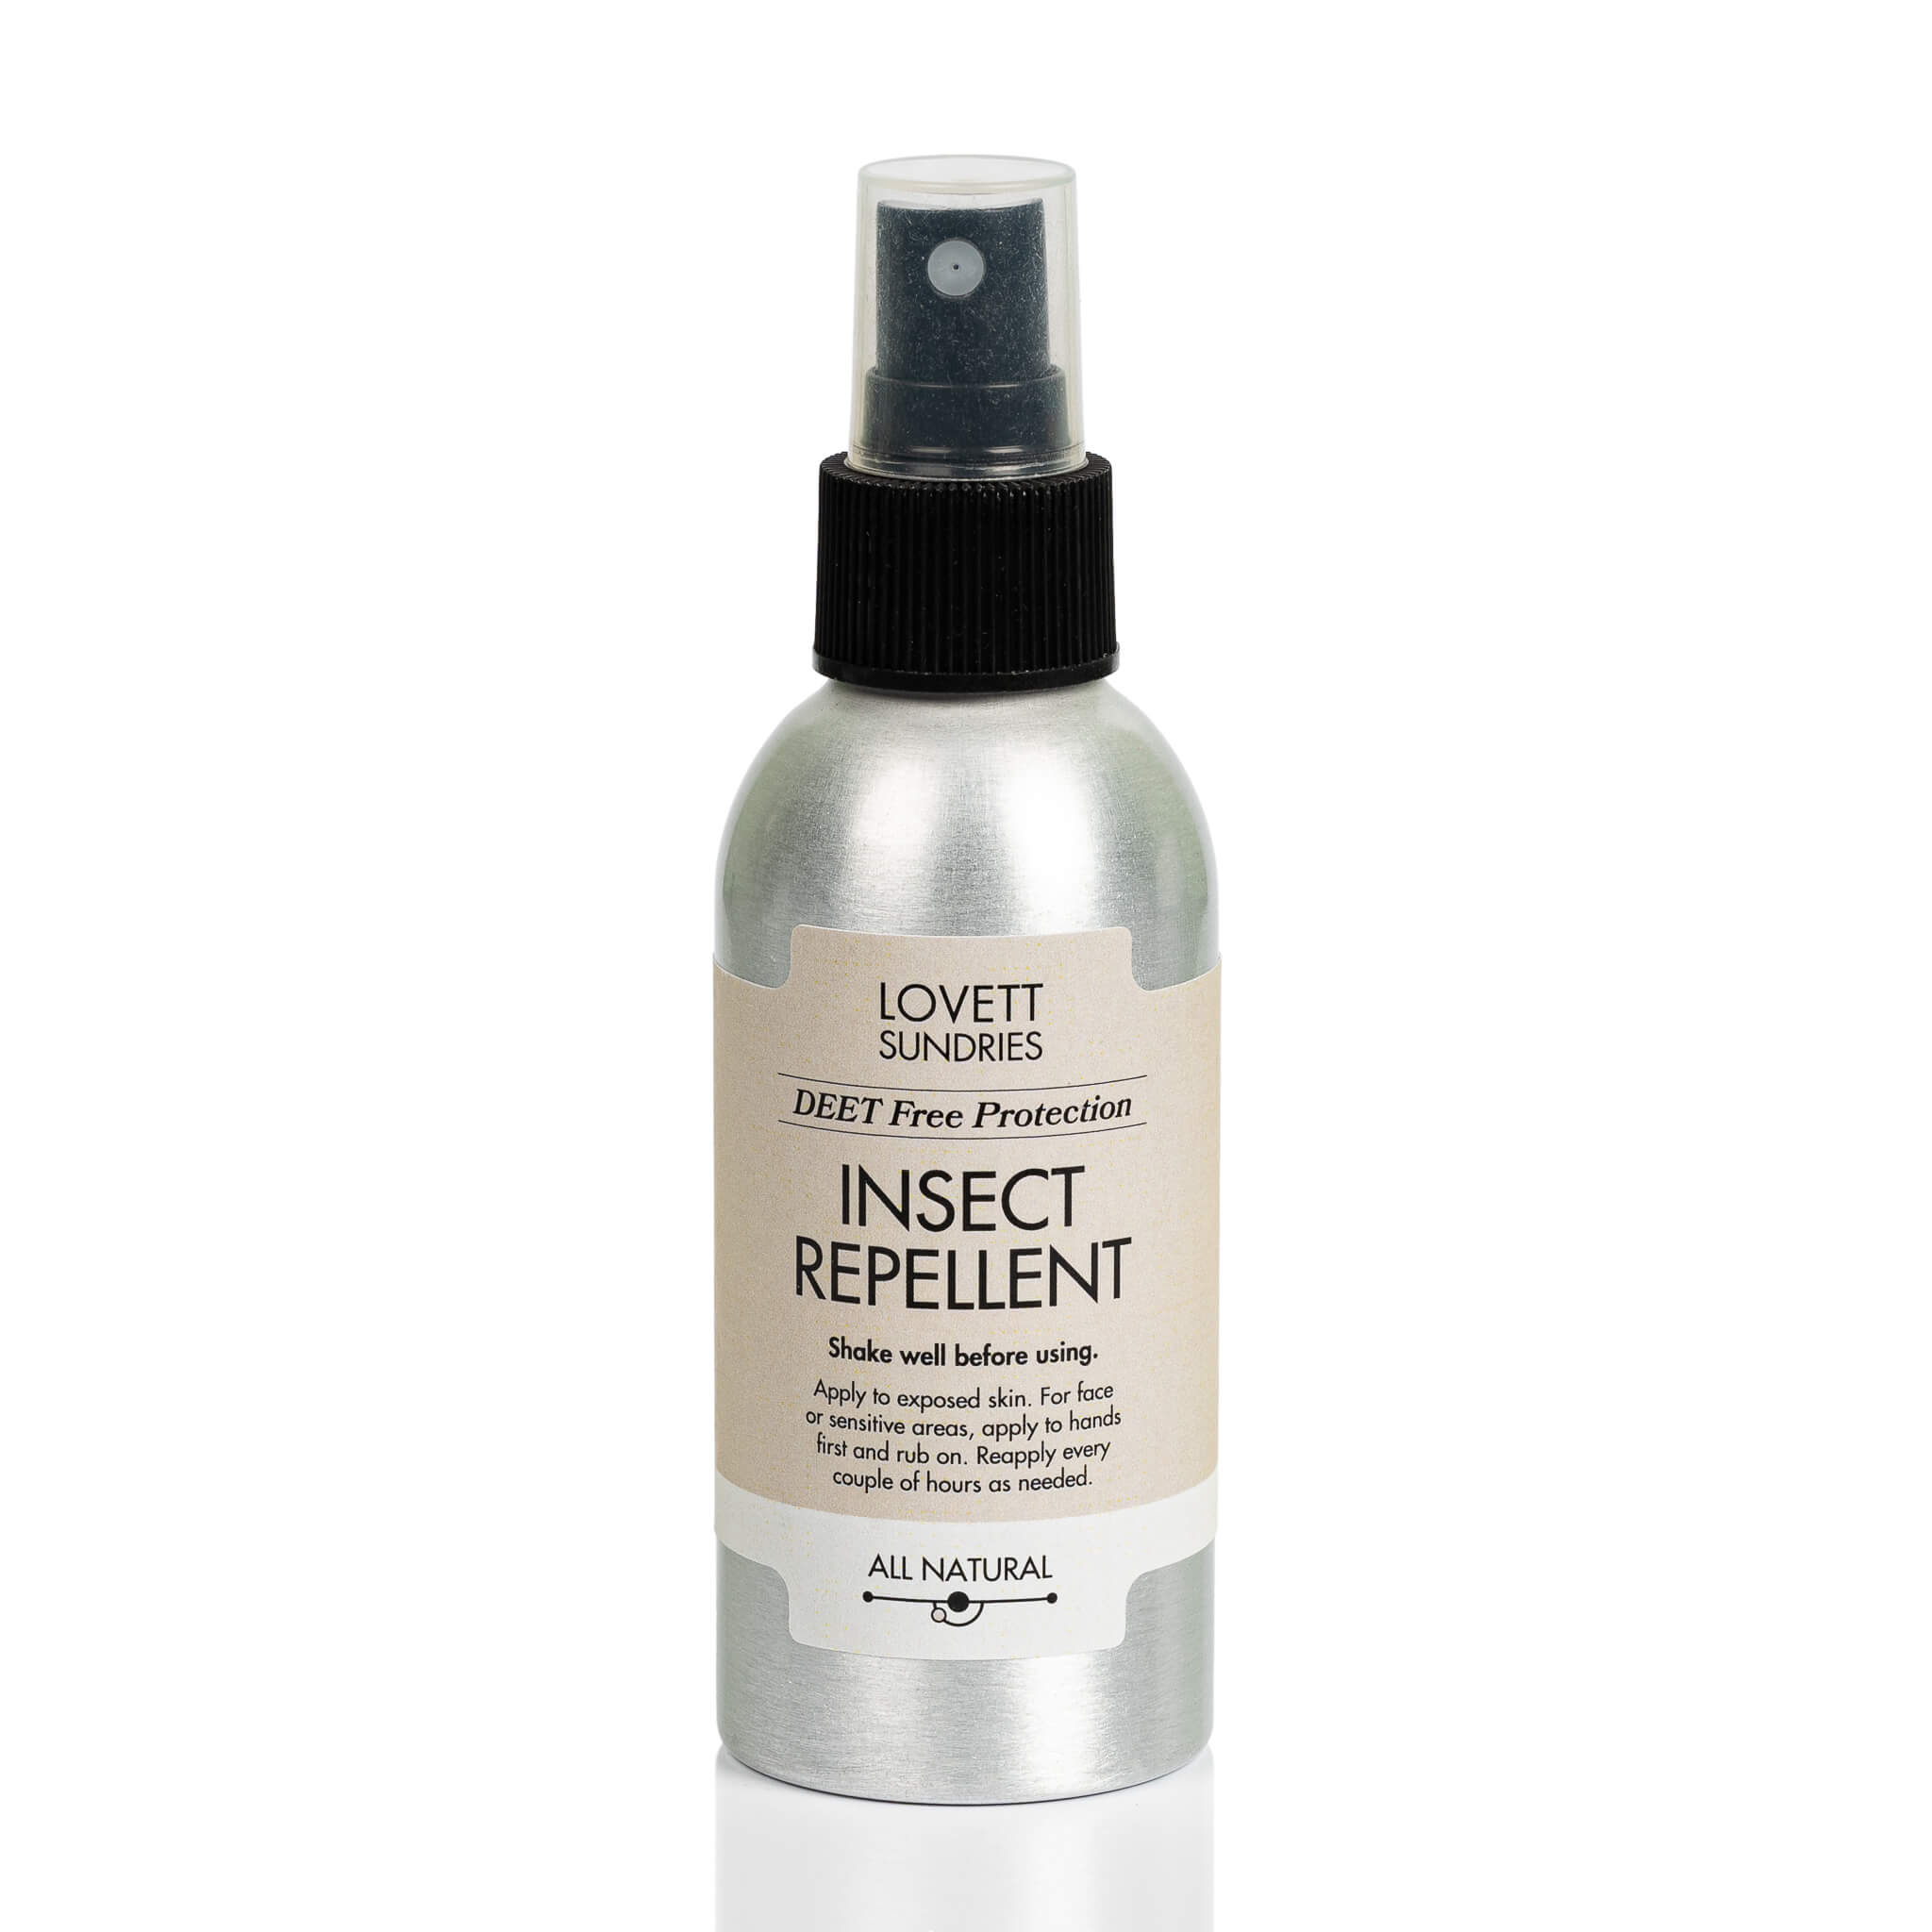 All natural deet free insect repellent in a recyclable aluminum bottle with a spray cap. 